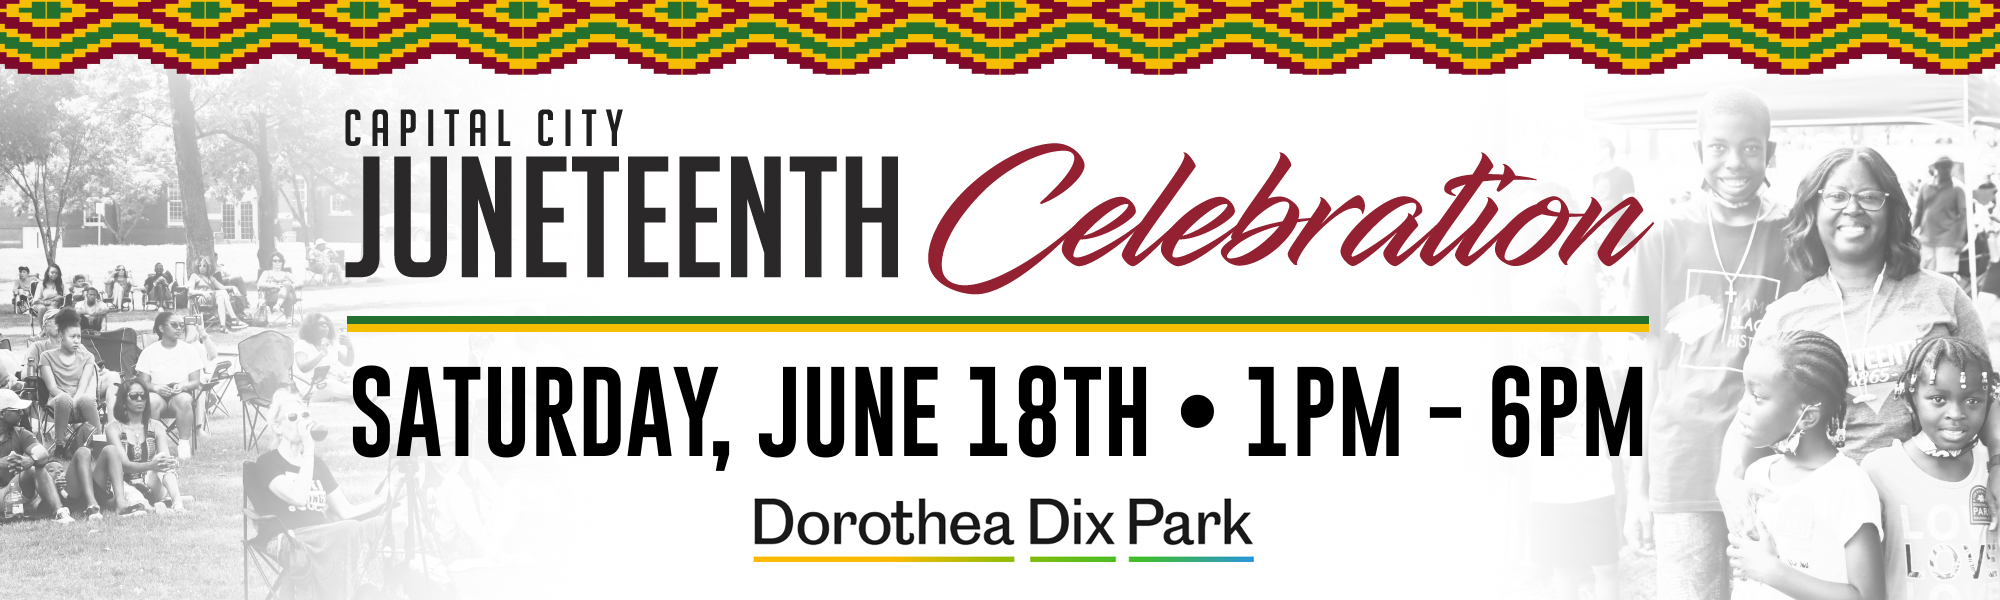 Capital City Juneteenth banner graphic